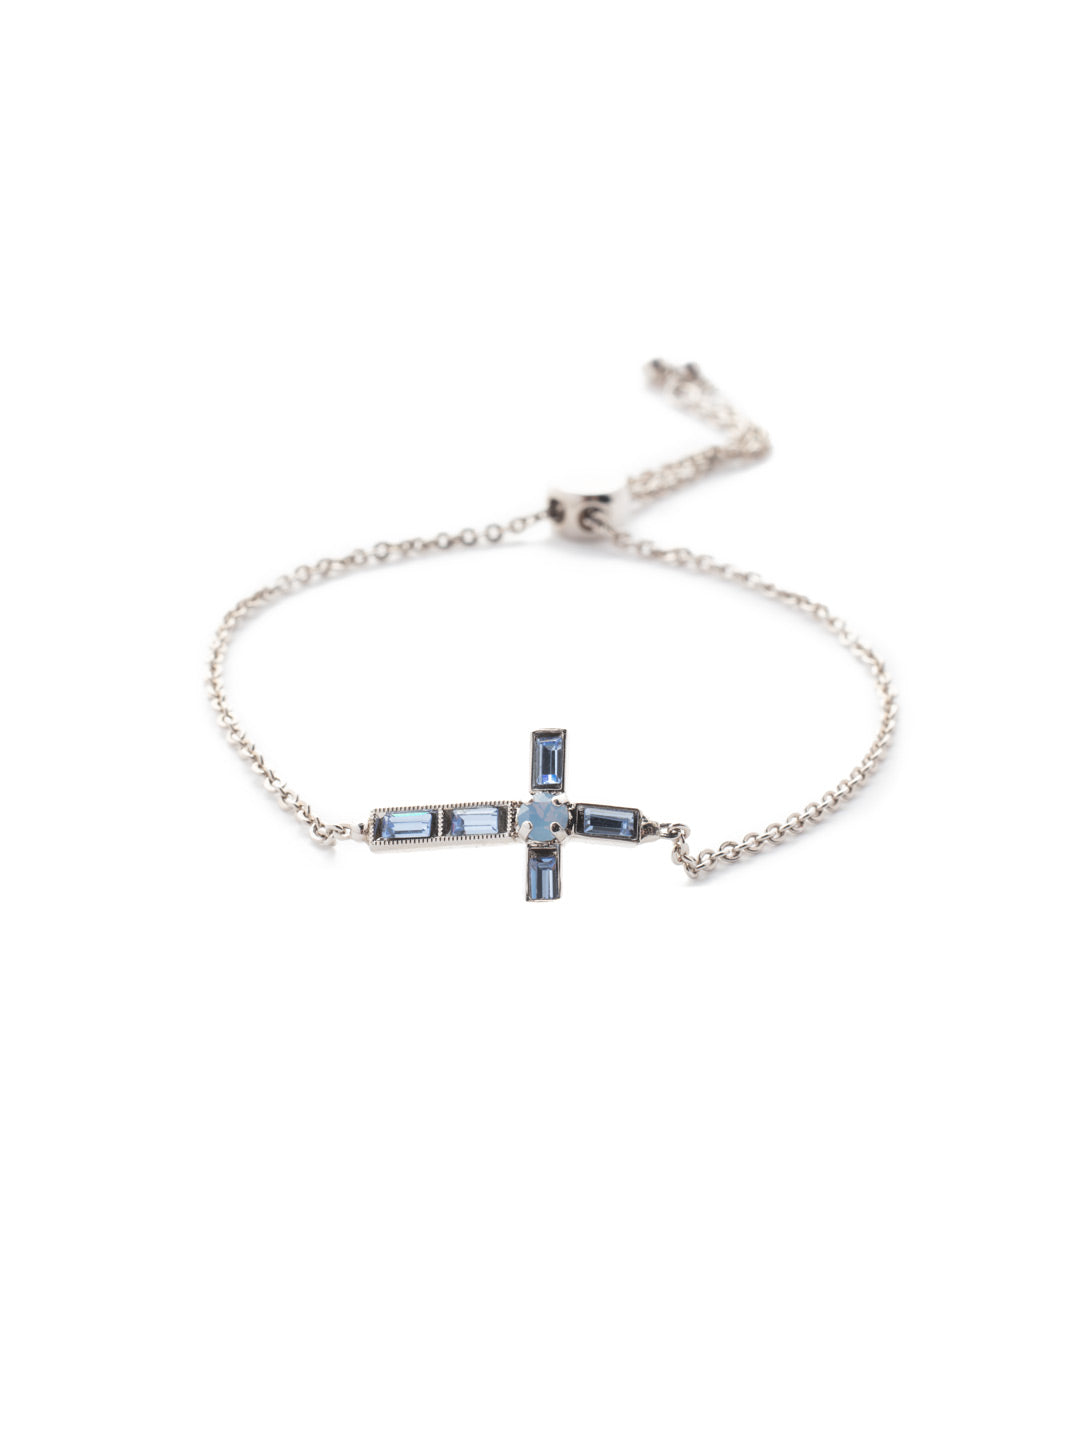 Tiffany Cross Slider Bracelet - BEX6PDWNB - A timeless cross, embellished in assorted crystals, sits prominently on a delicate chain secured with a slider. From Sorrelli's Windsor Blue collection in our Palladium finish.